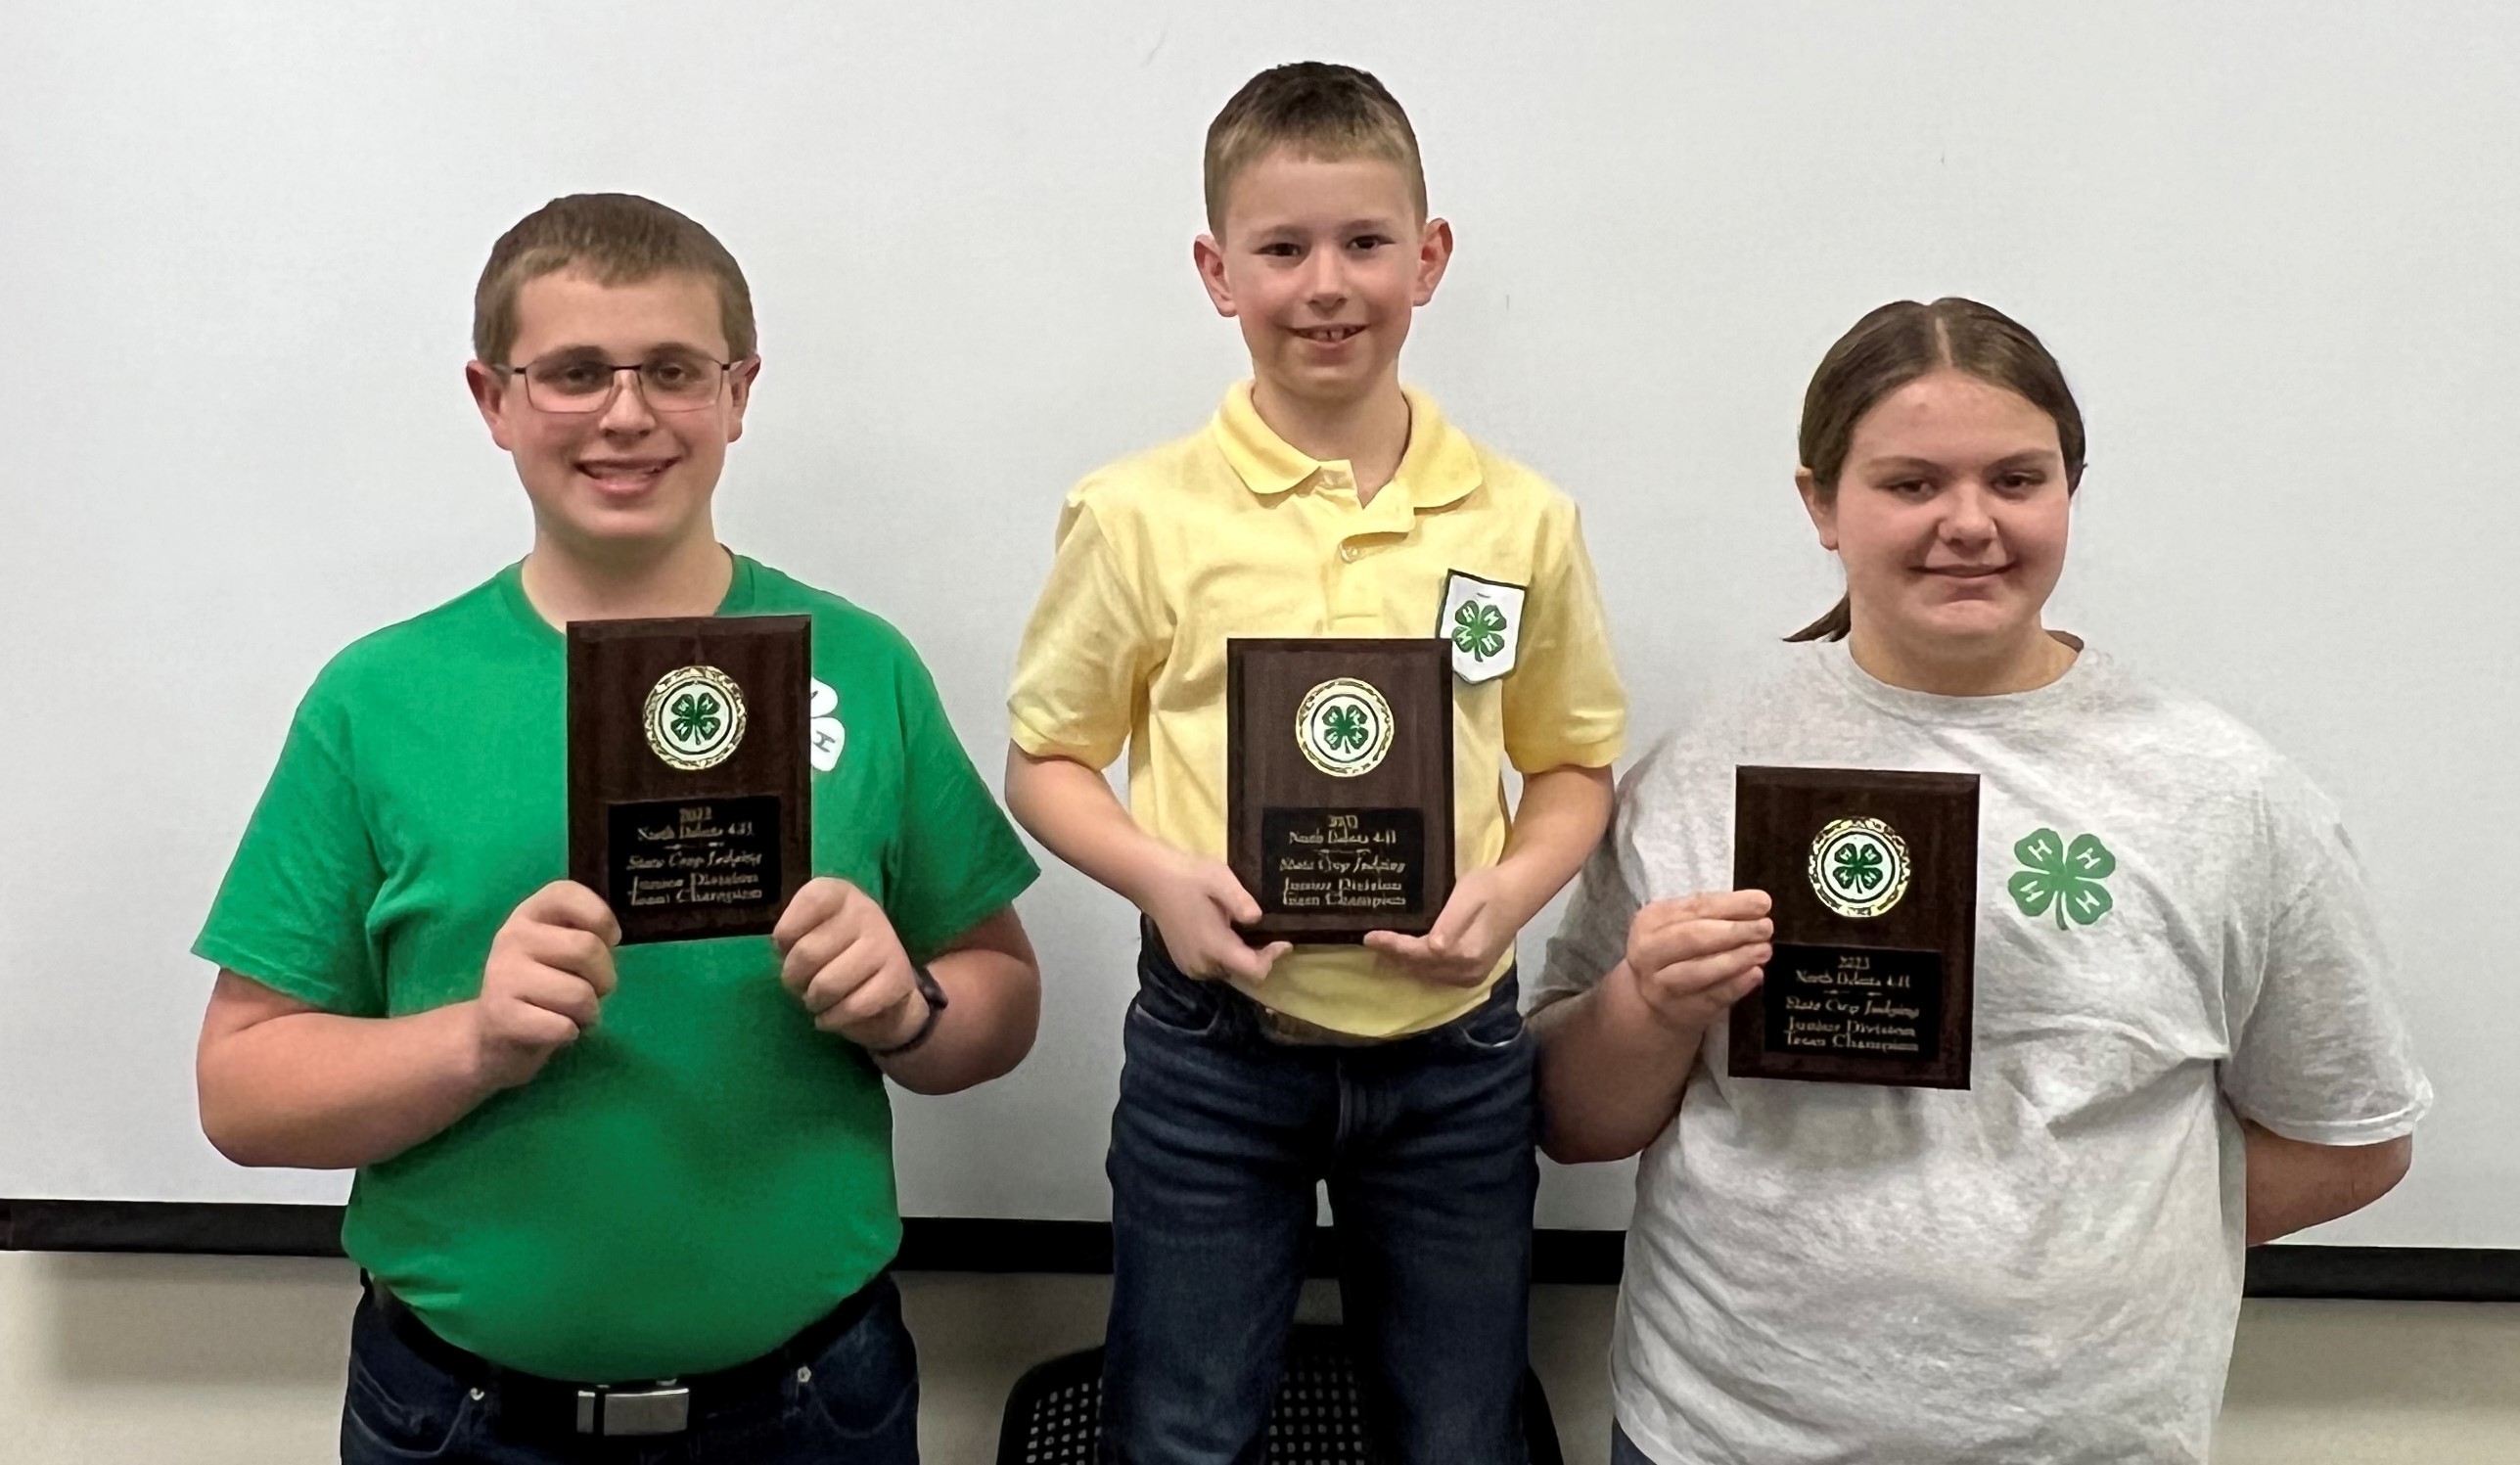 The Foster County 4-H crop judging team of Jackson Topp, Brant Klein and Kenleigh Henrichs placed first in the junior division of the state 4-H crop judging contest. (NDSU photo)